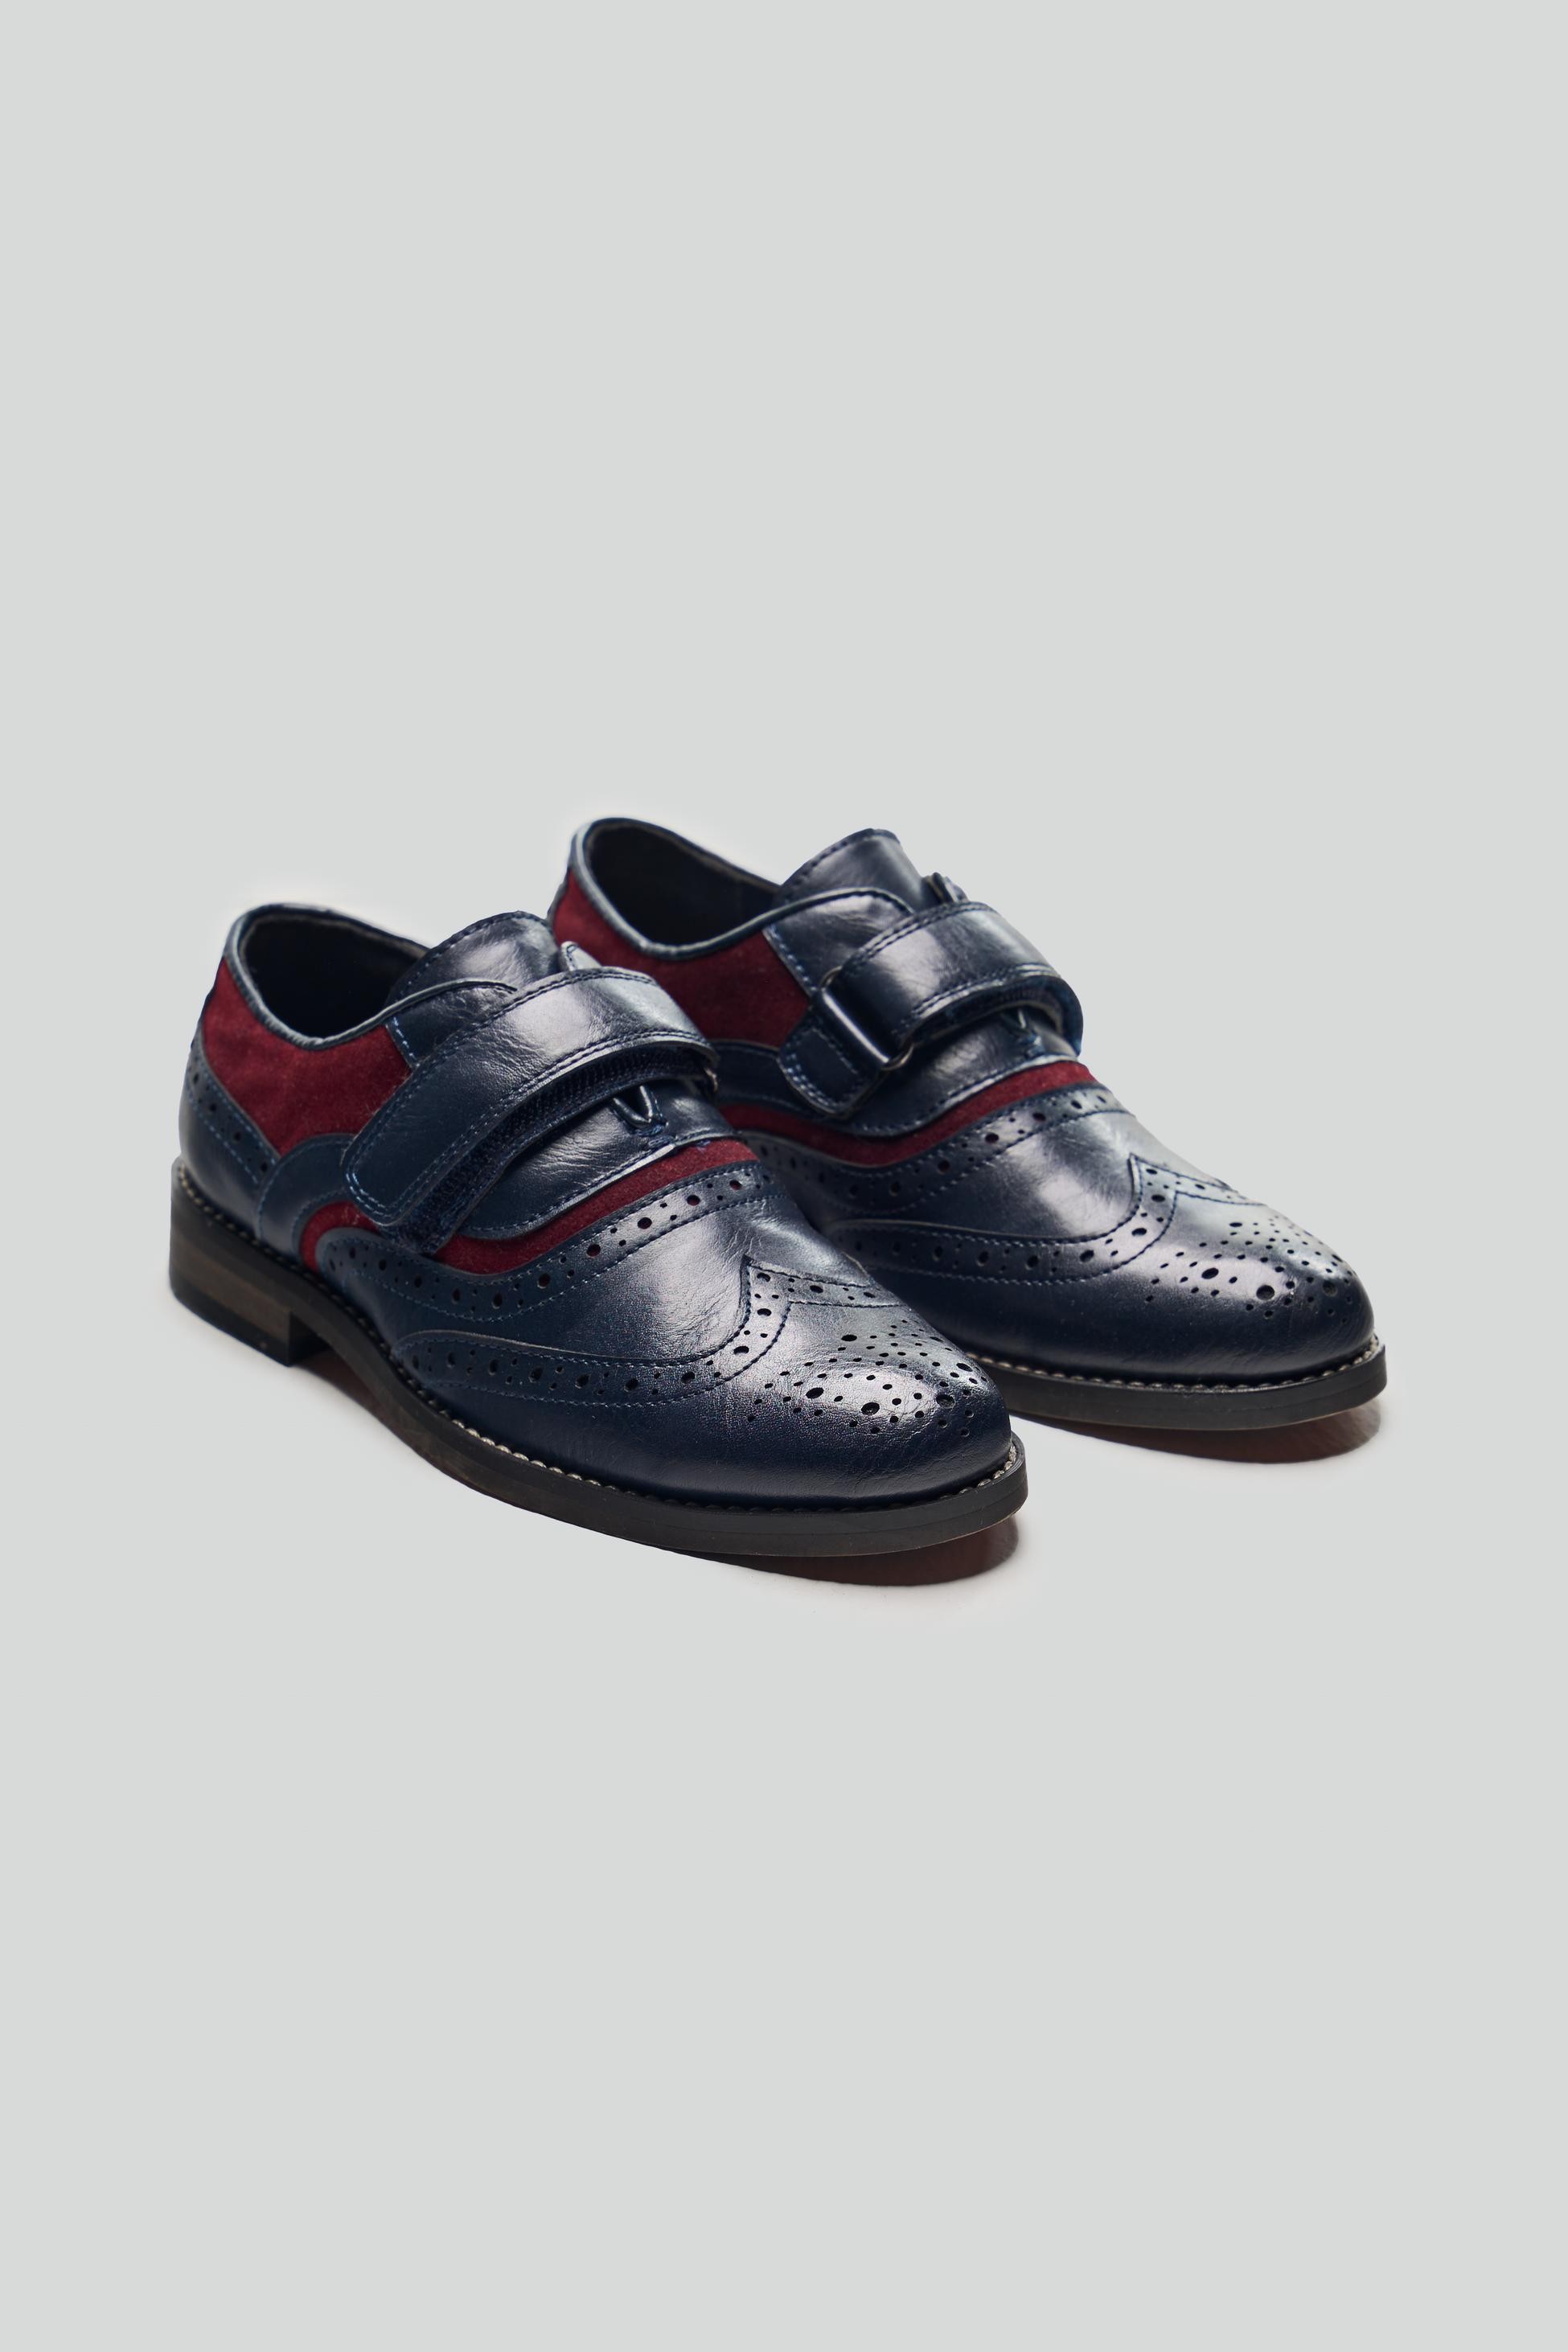 Boys Lace-up Oxford Brogue Dress shoes - RUSSEL - Navy Blue - Red